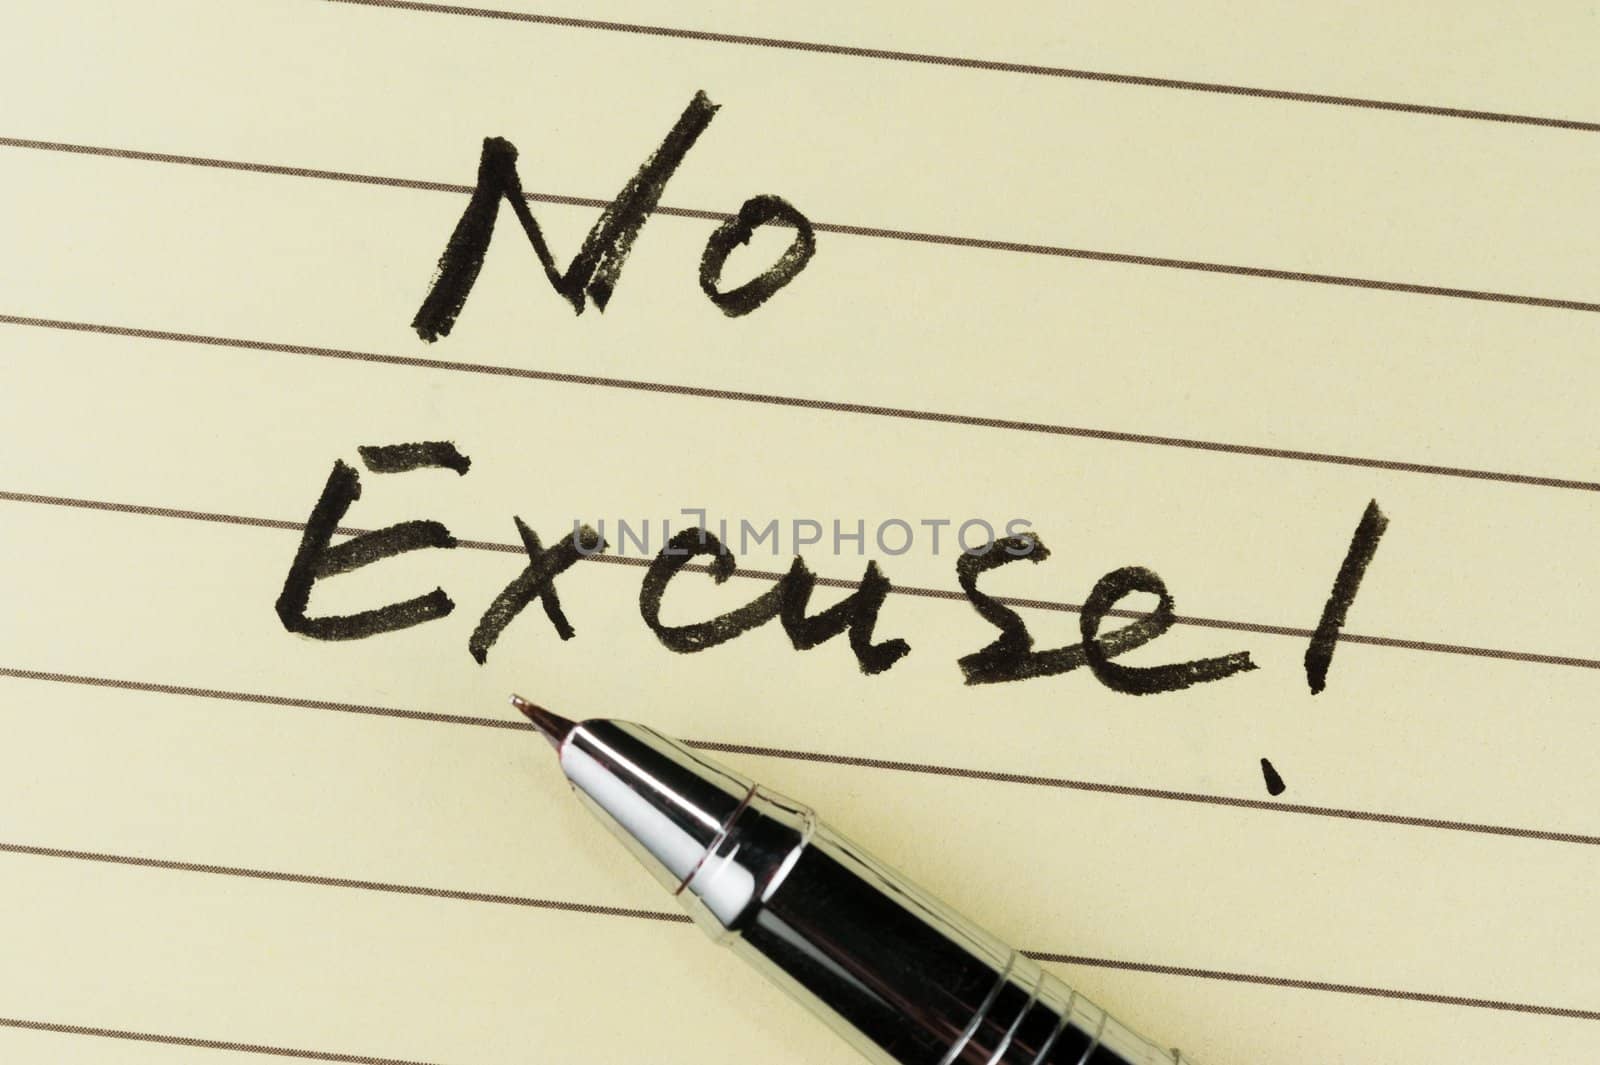 No excuse words written on lined paper with a pen on it